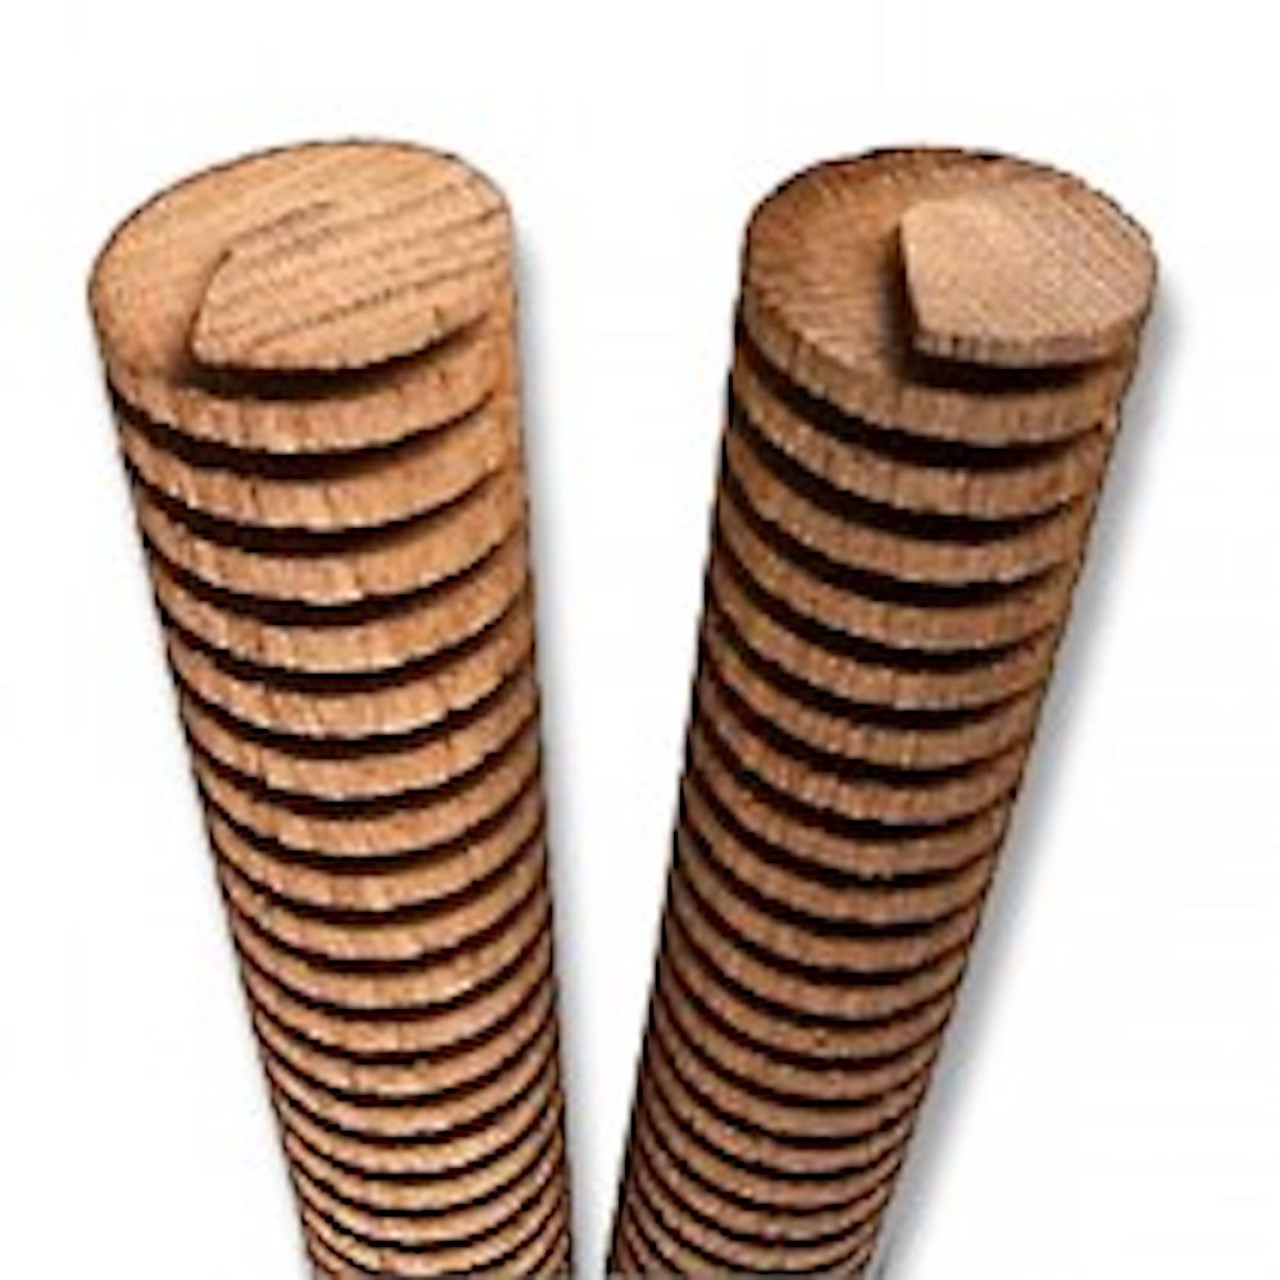 French Oak Infusion Spiral Sticks 2 Pack - Heavy Toast